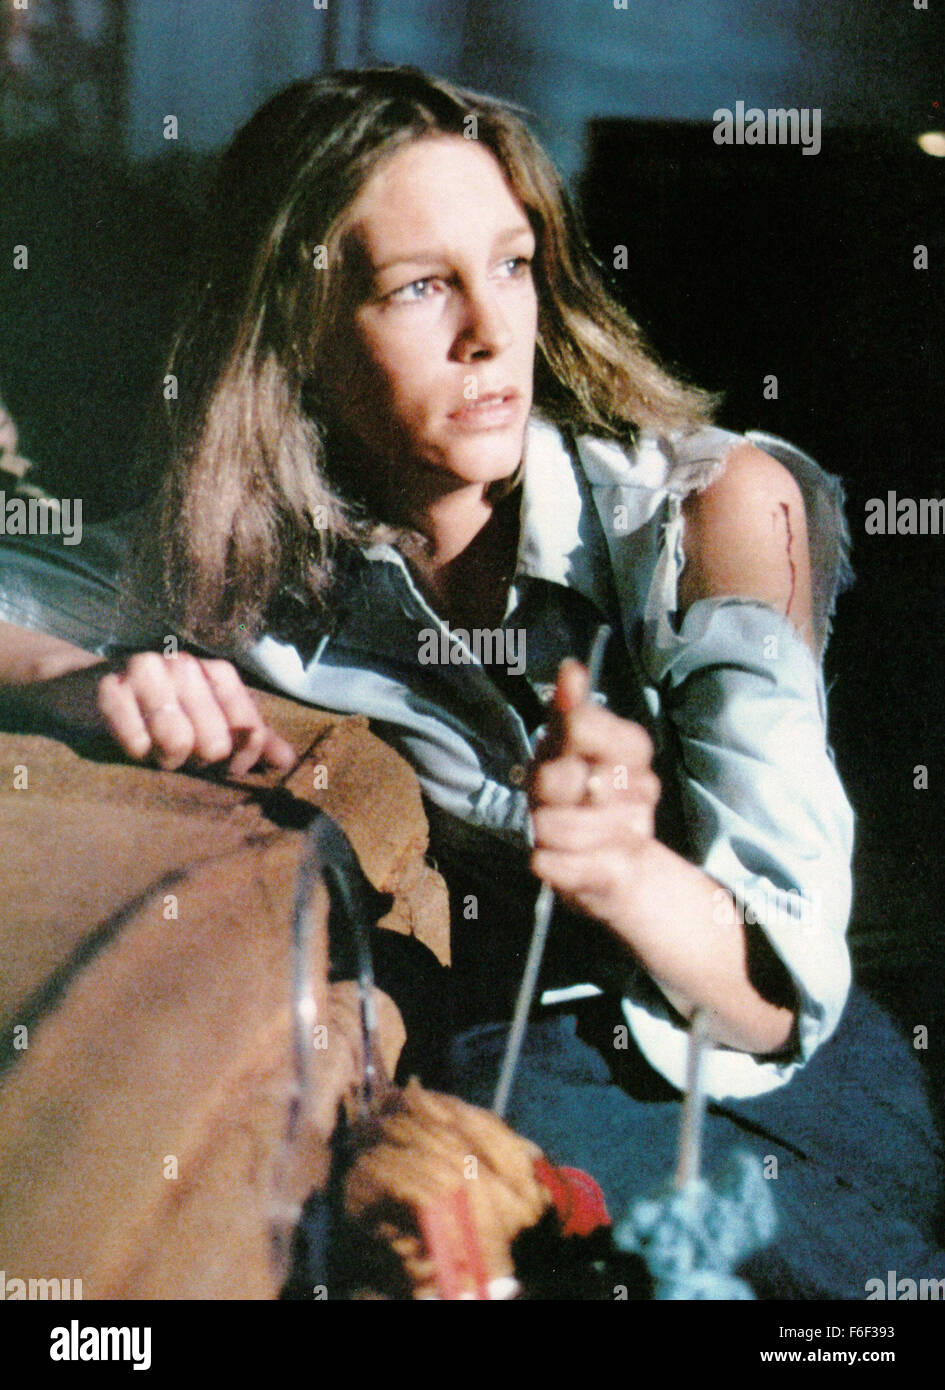 Oct 25, 1978; Los Angeles, CA, USA; RELEASE DATE: October 25, 1978. DIRECTOR: John Carpenter. STUDIO: Compass International Pictures. PLOT: A psychotic murderer institutionalized since childhood escapes on a mindless rampage while his doctor chases him through the streets. PICTURED: Actress JAMIE LEE CURTIS as Laurie Strode. Stock Photo